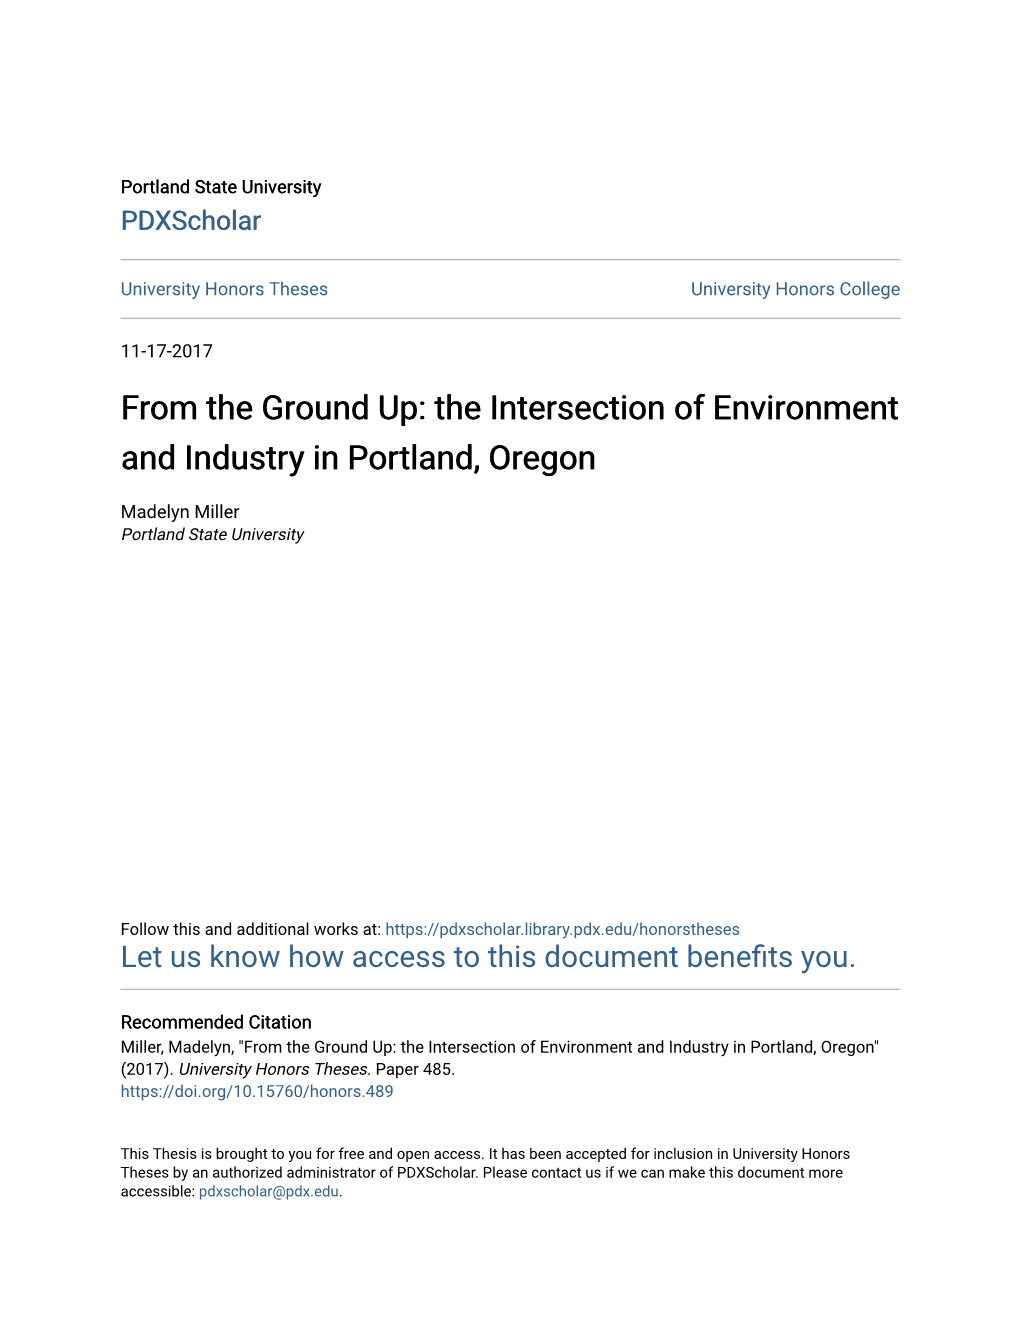 The Intersection of Environment and Industry in Portland, Oregon